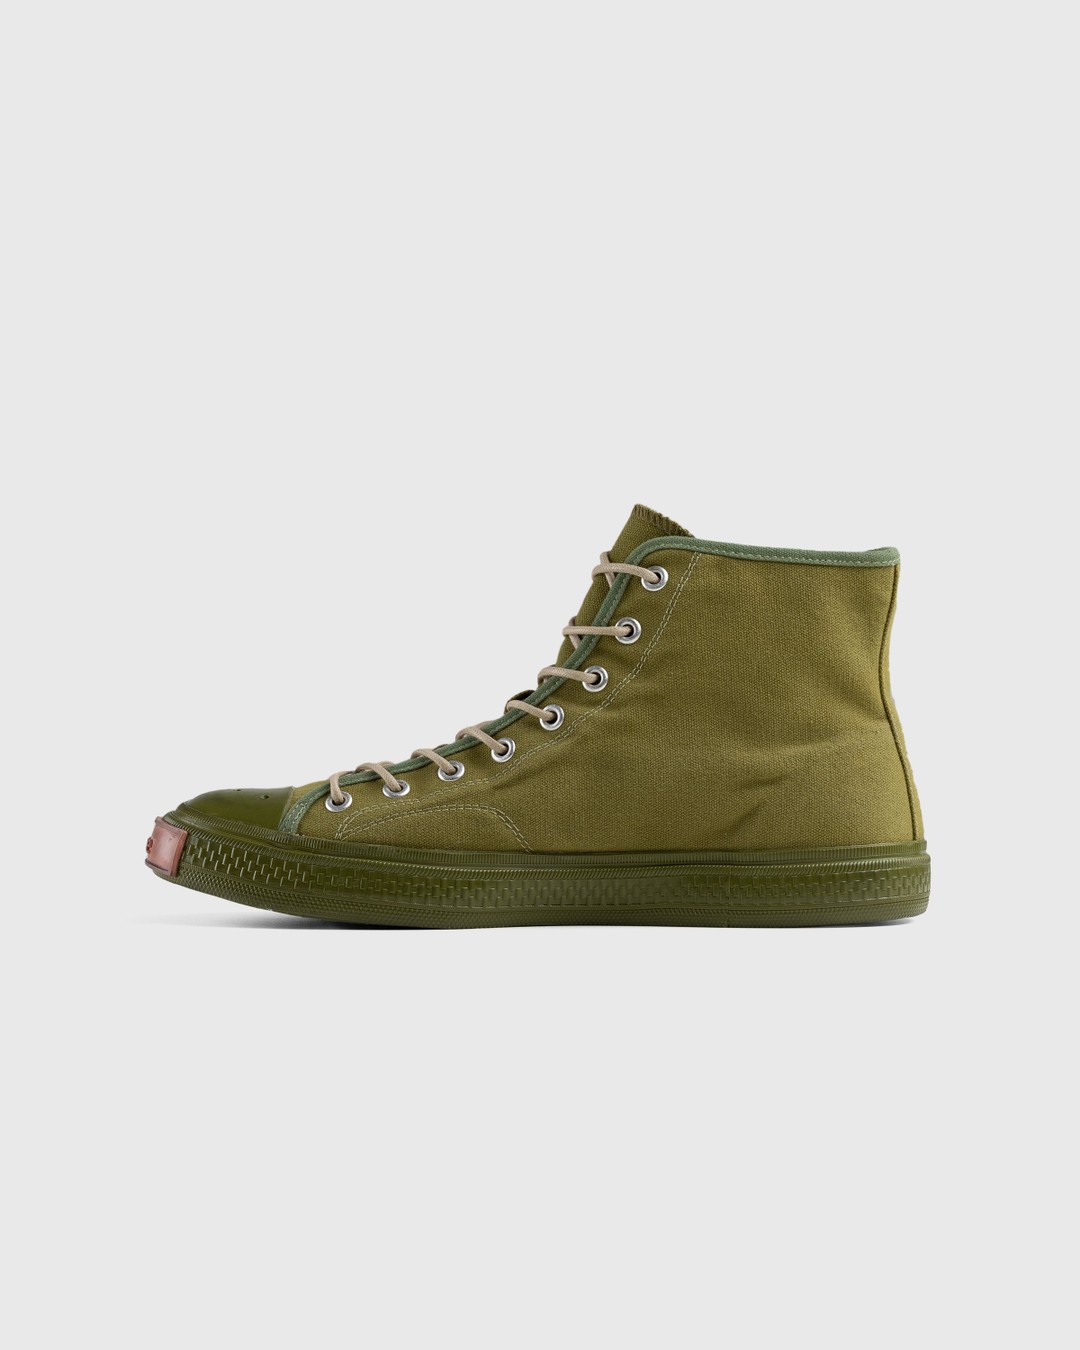 Acne Studios – Ballow High-Top Sneakers Olive Green - High Top Sneakers - Green - Image 2